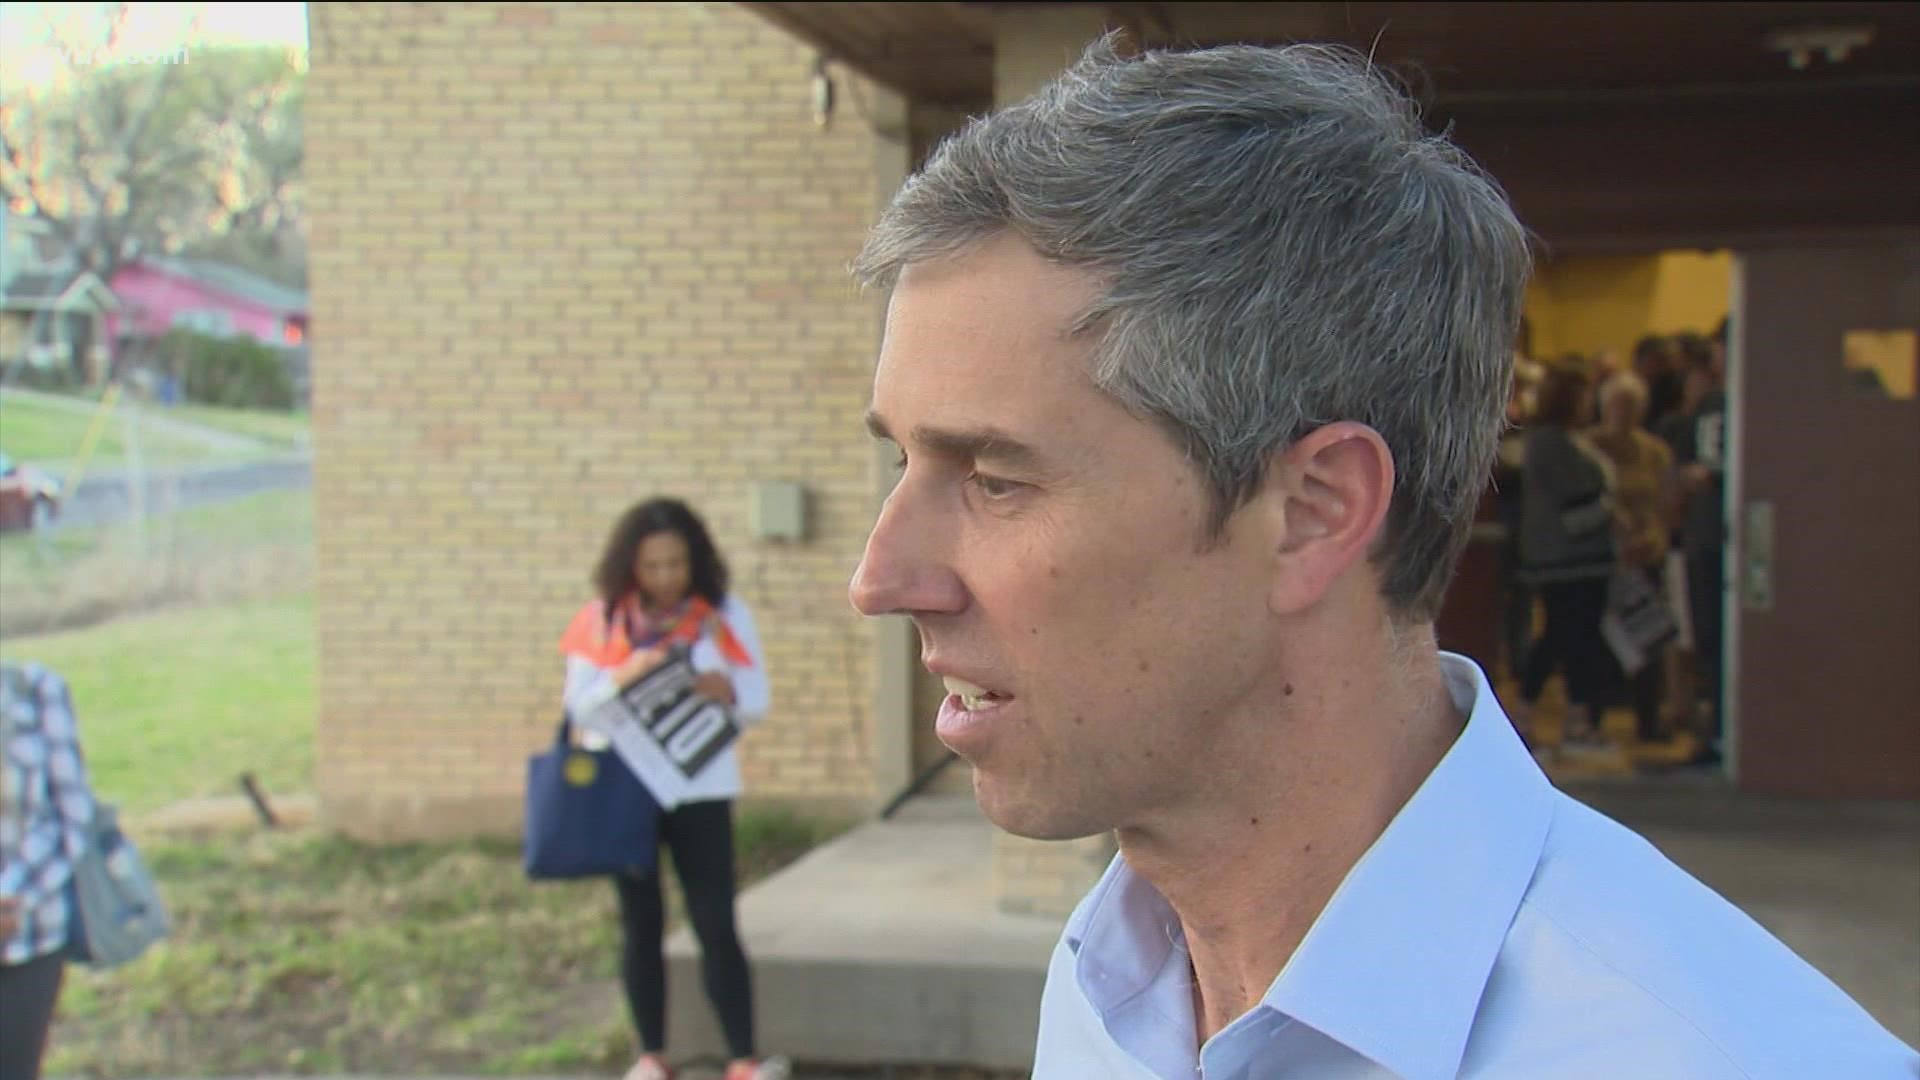 Texas gubernatorial candidate Beto O'Rourke campaigned in Austin on Wednesday evening. Public school and was a big theme O'Rourke touched on.